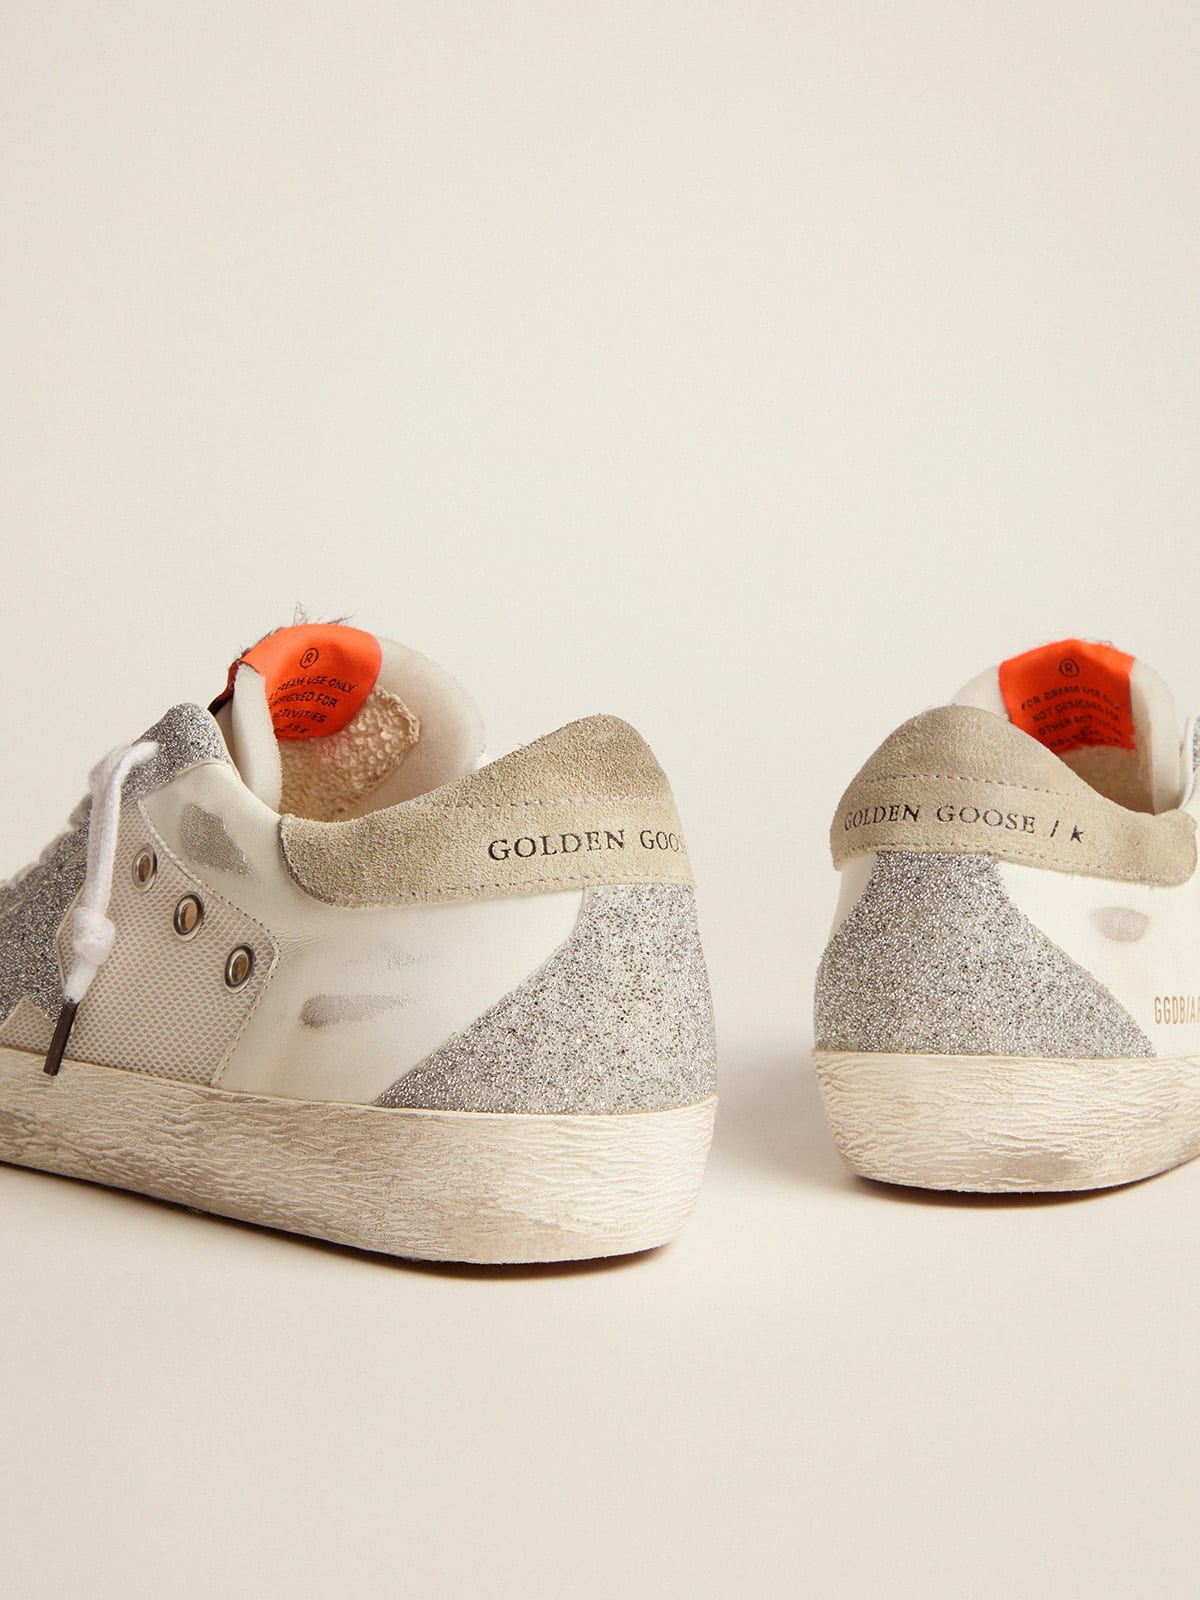 Golden Goose - Super-Star LTD sneakers in white leather and mesh with star and inserts in silver micro-crystals in 